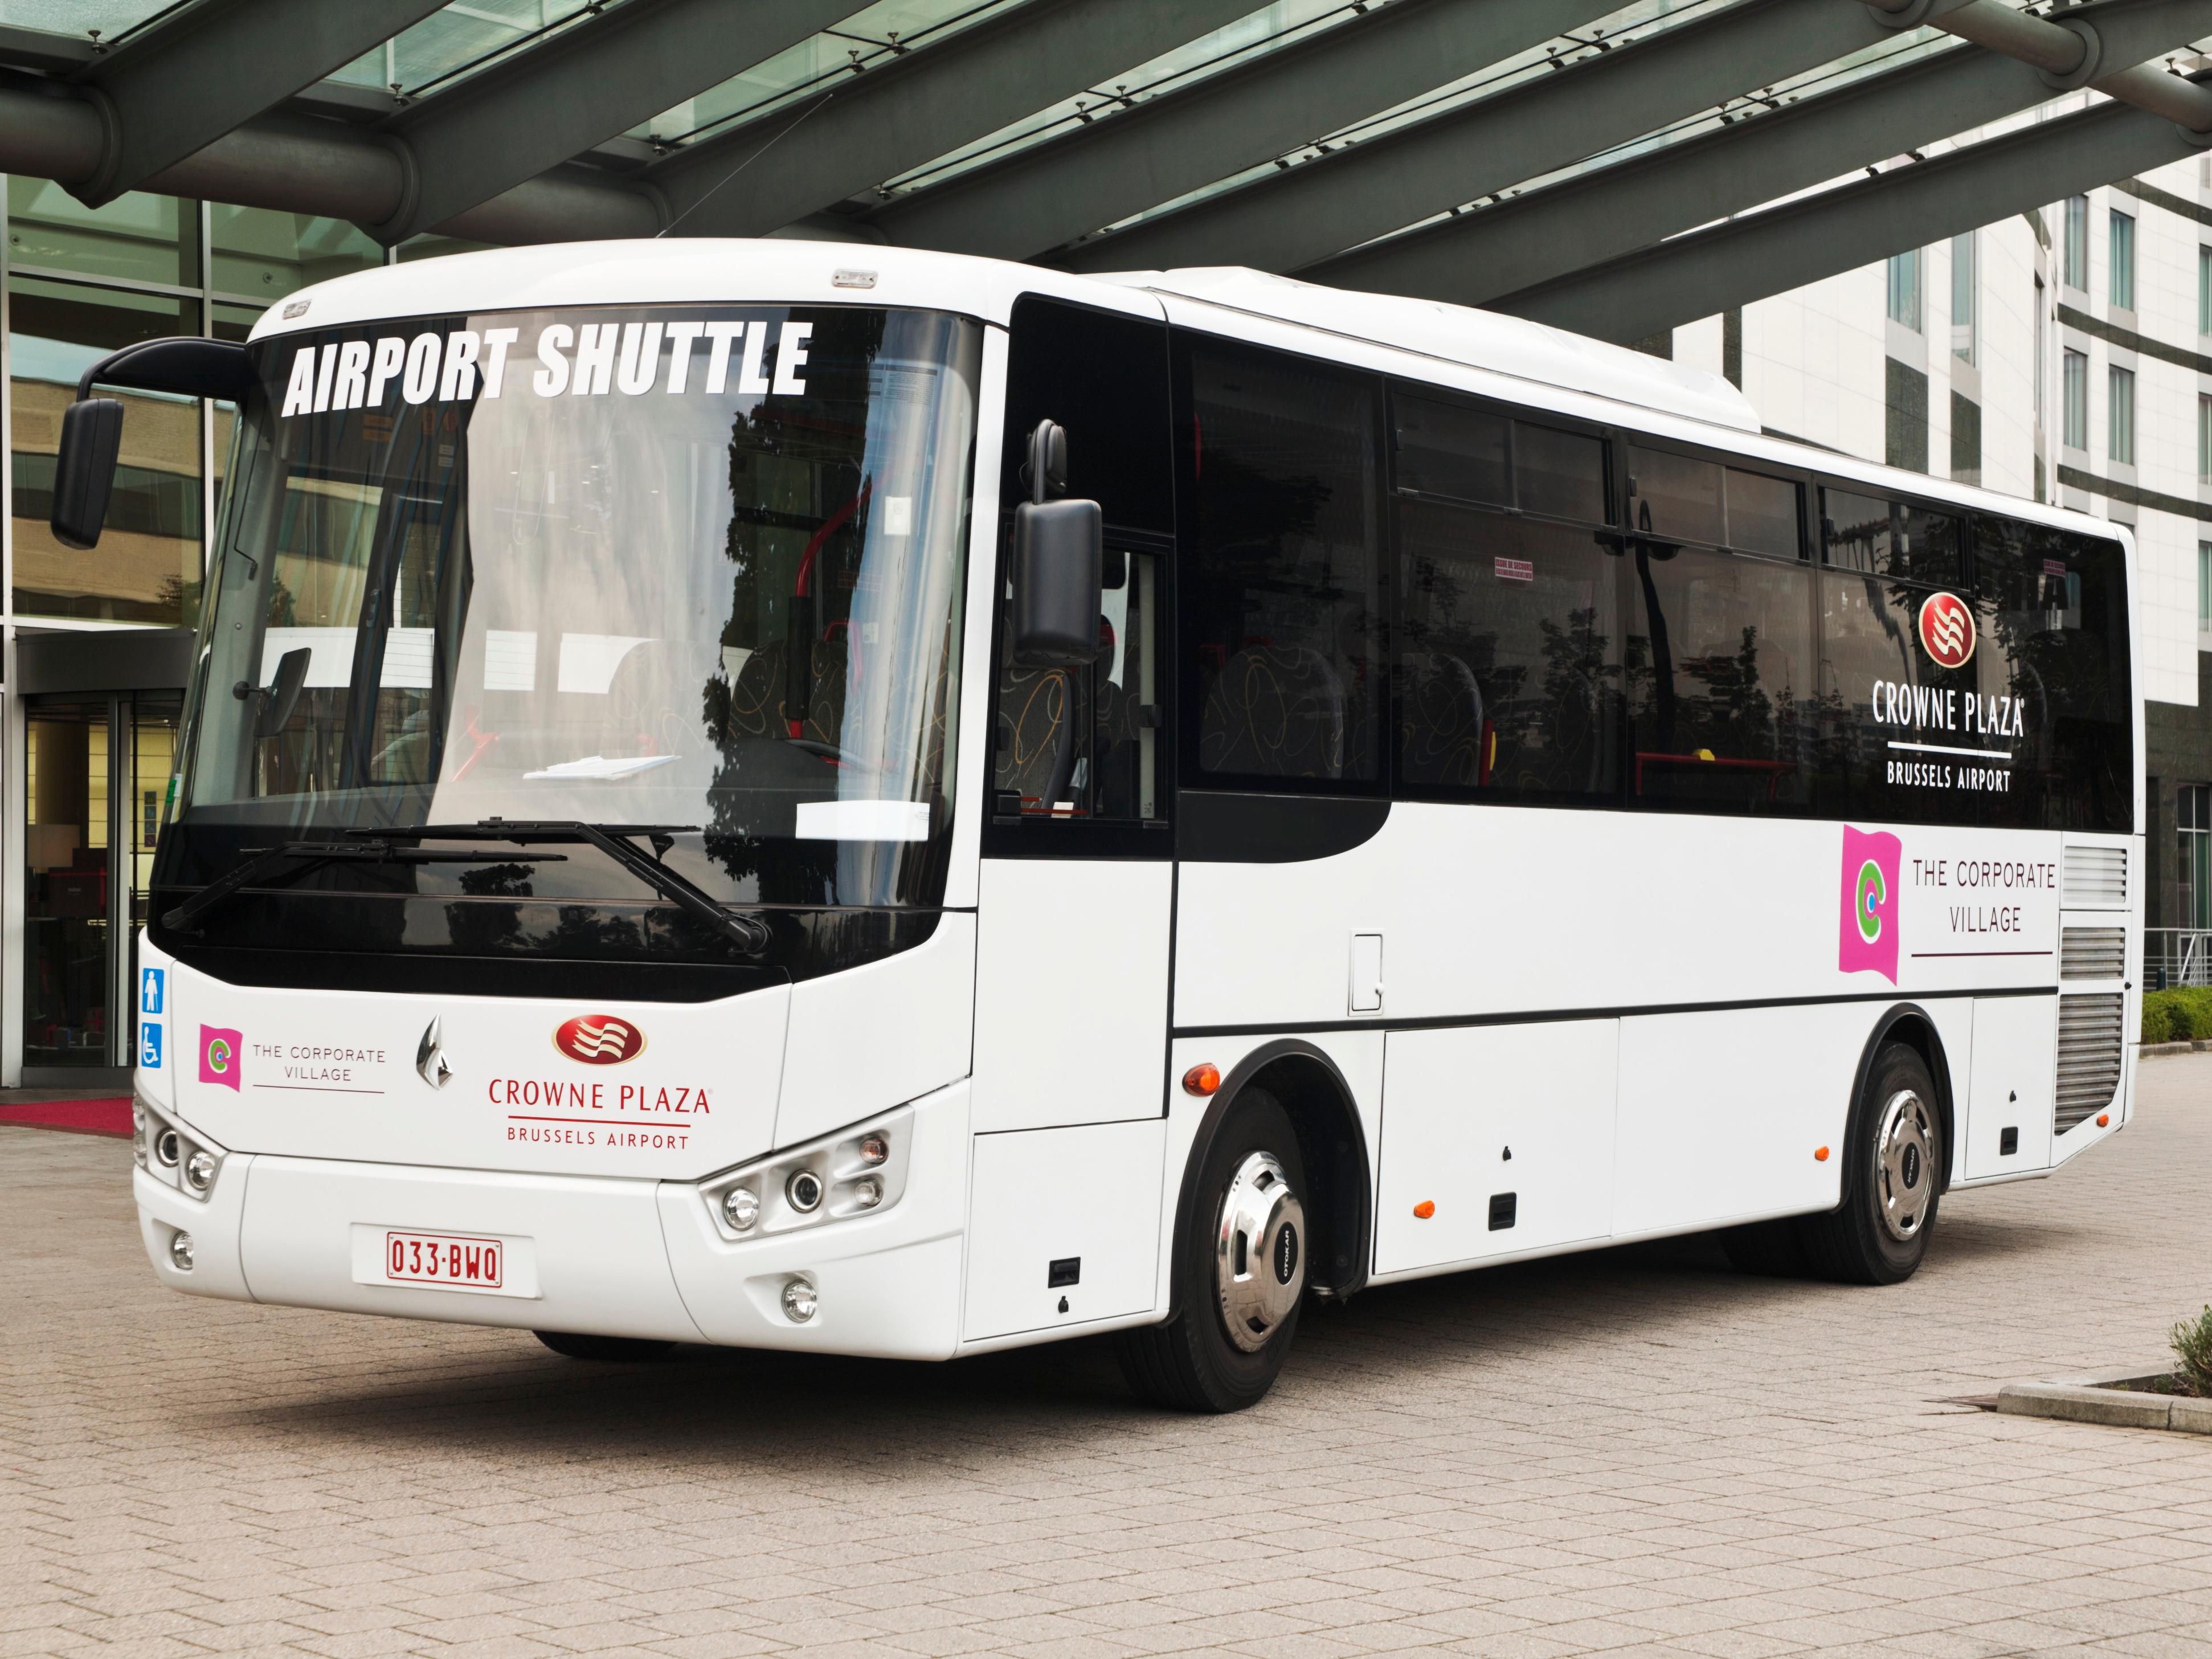 Enjoy seamless transfers! Our complimentary hotel shuttle runs daily from 6AM to 11PM. Catch it at Brussels Airport' central bus station, Level 0, Departure Bay E. Stress-free travel from the airport to your ultimate comfort zone, and back. Check out the timetable in the link below.